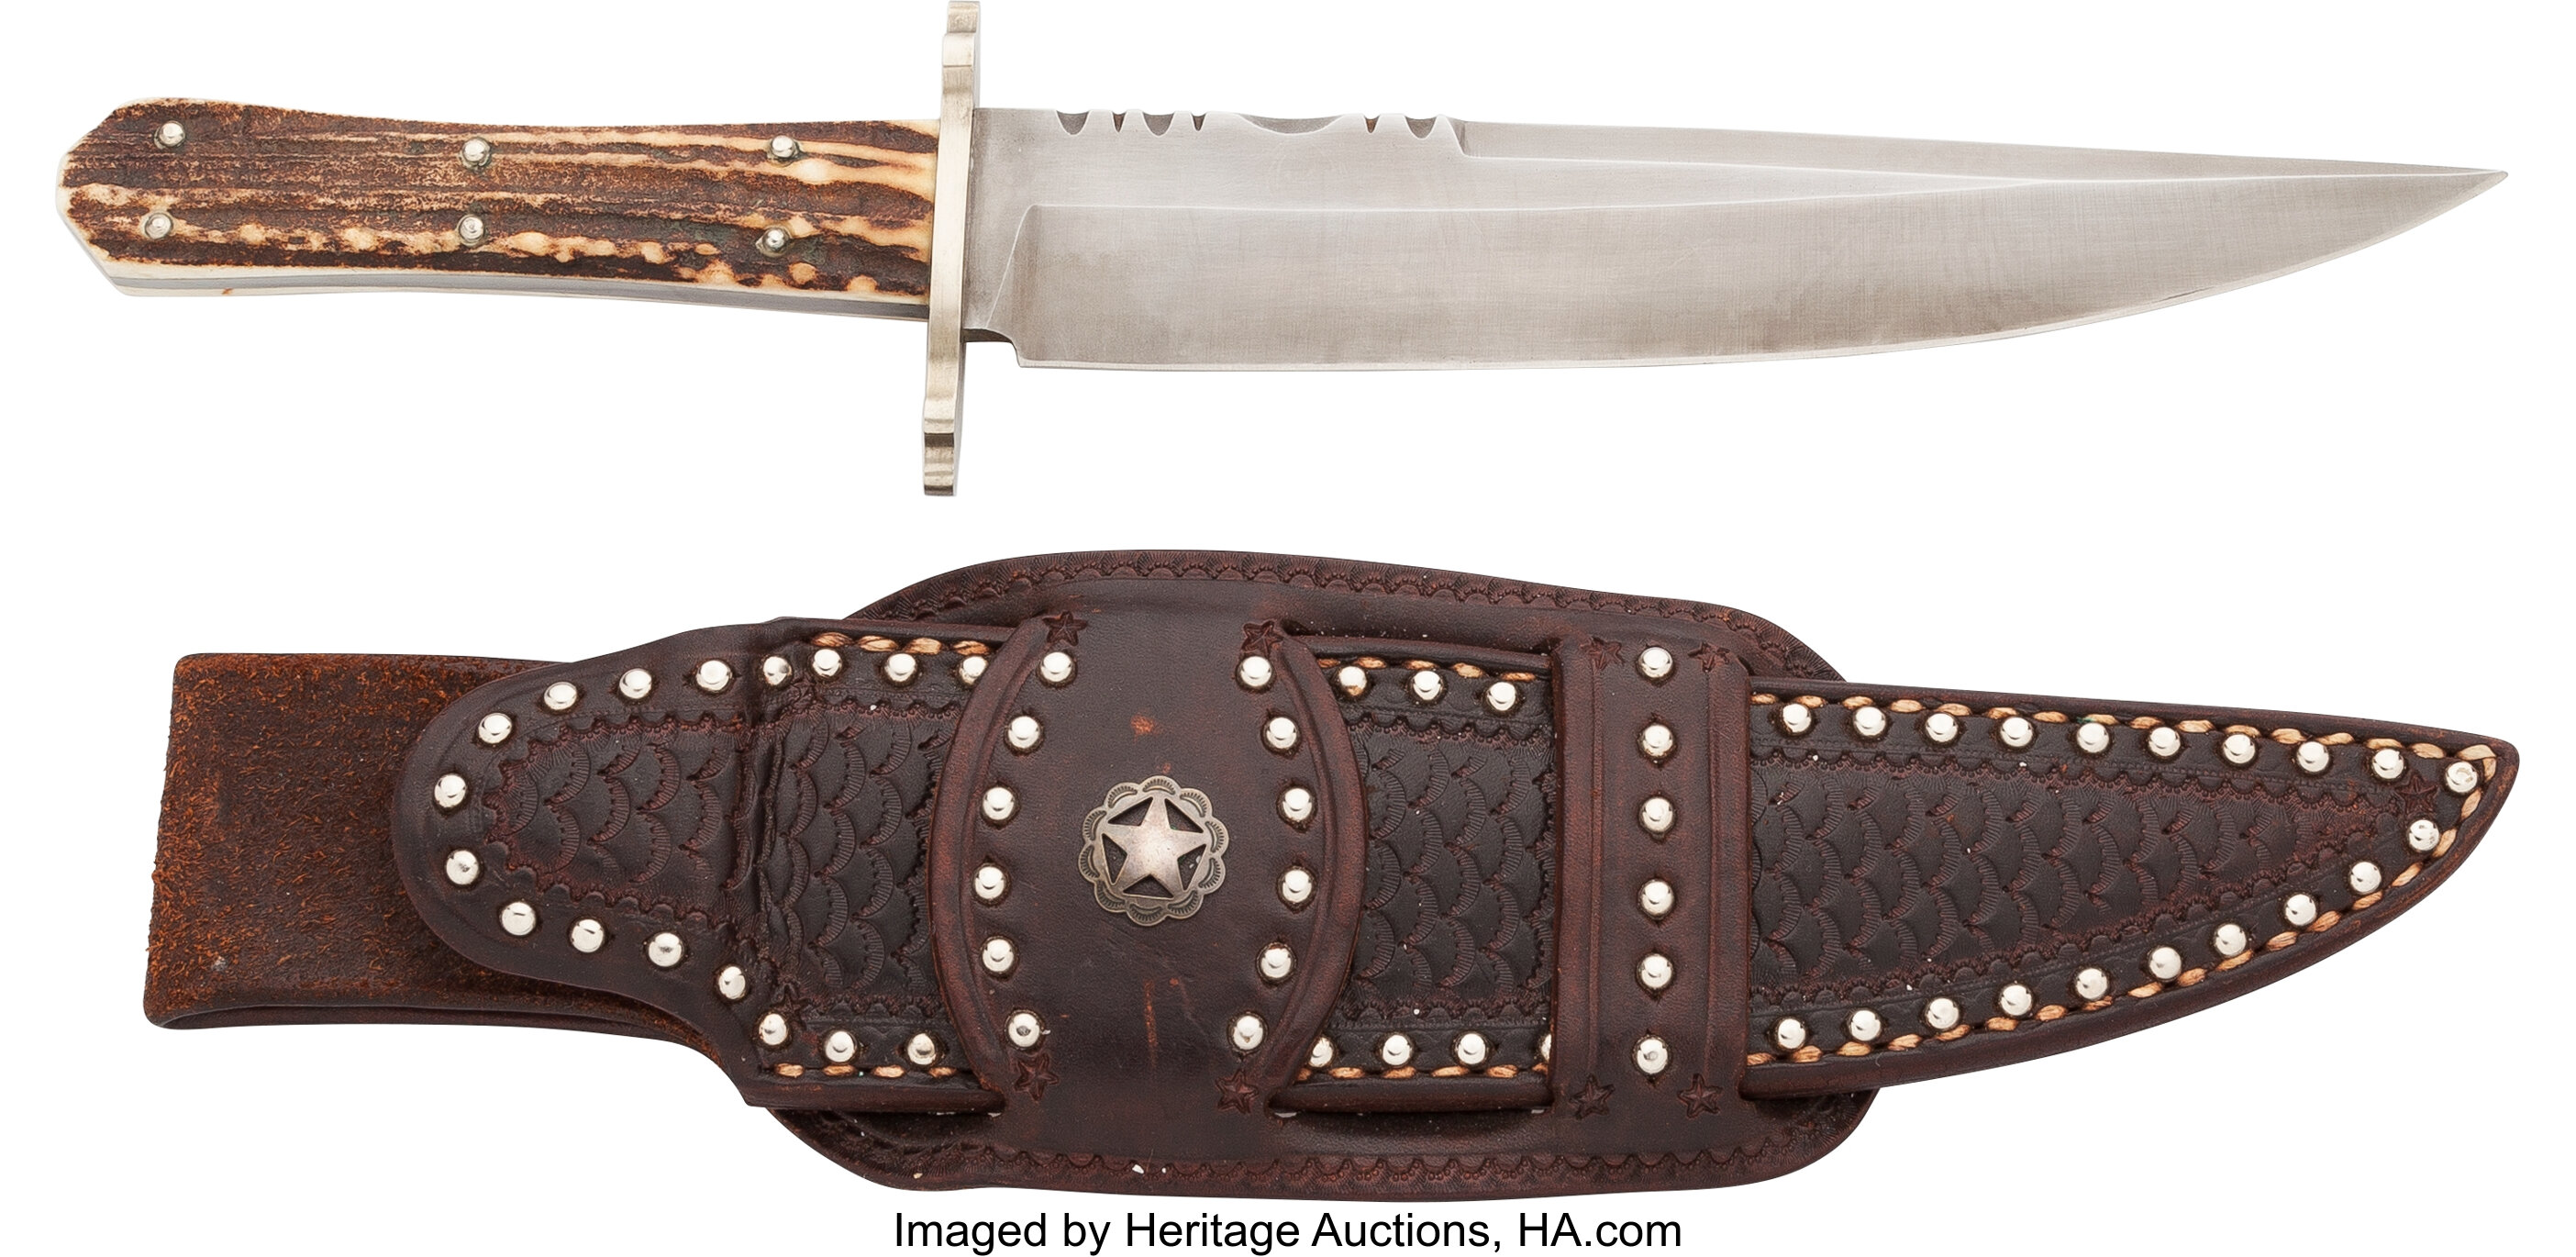 Sold at Auction: Handmade Mexican Bowie Knife W/ Leather Sheath